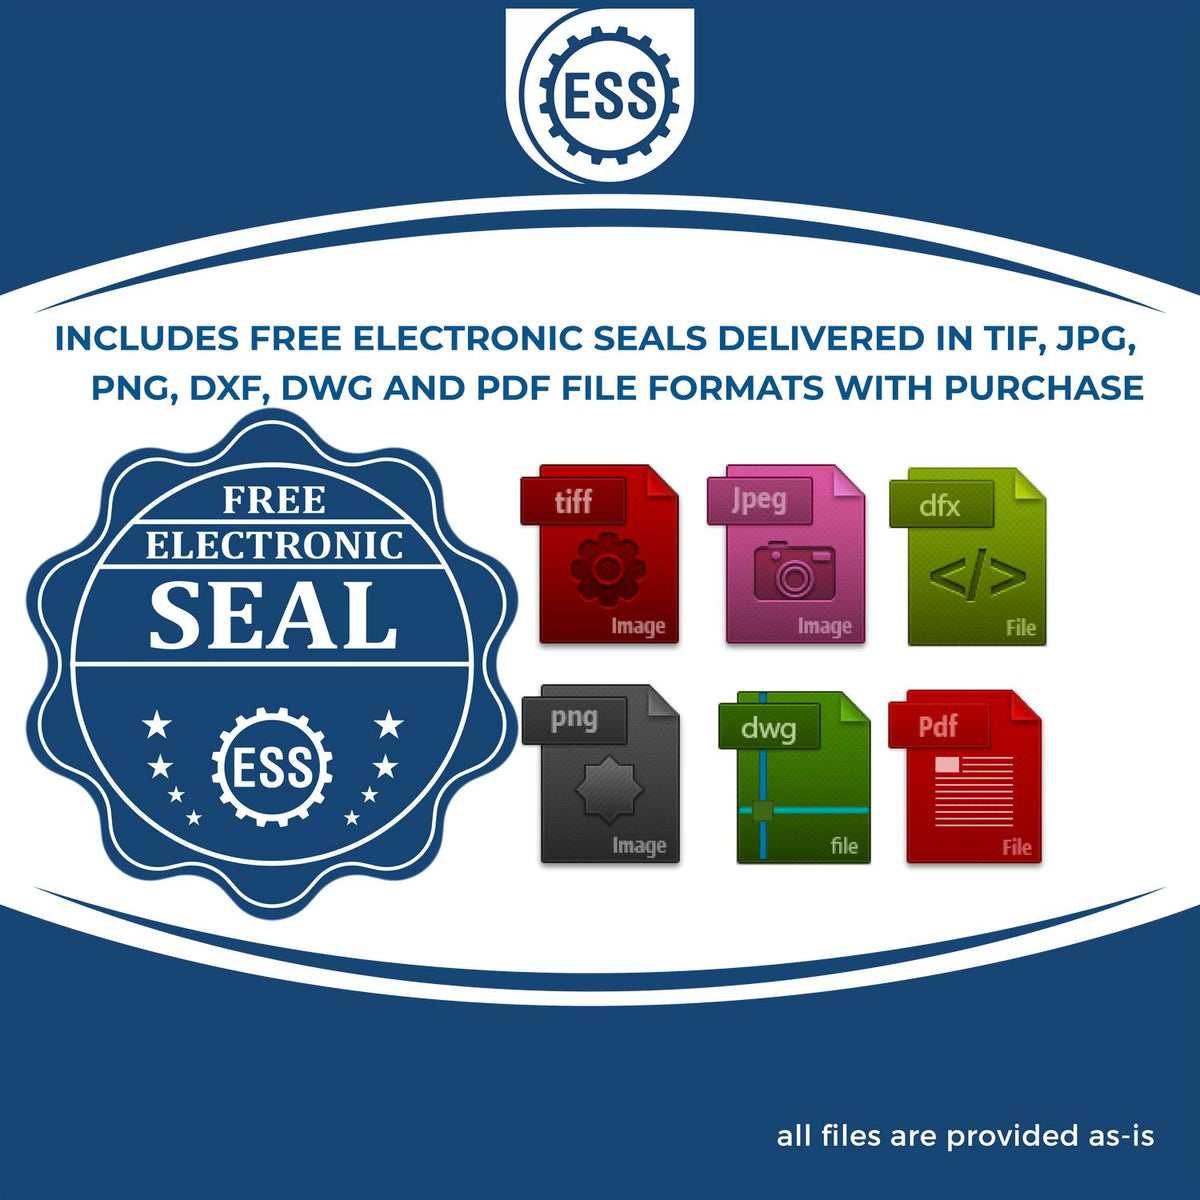 An infographic for the free electronic seal for the PSI New Hampshire Notary Stamp illustrating the different file type icons such as DXF, DWG, TIF, JPG and PNG.